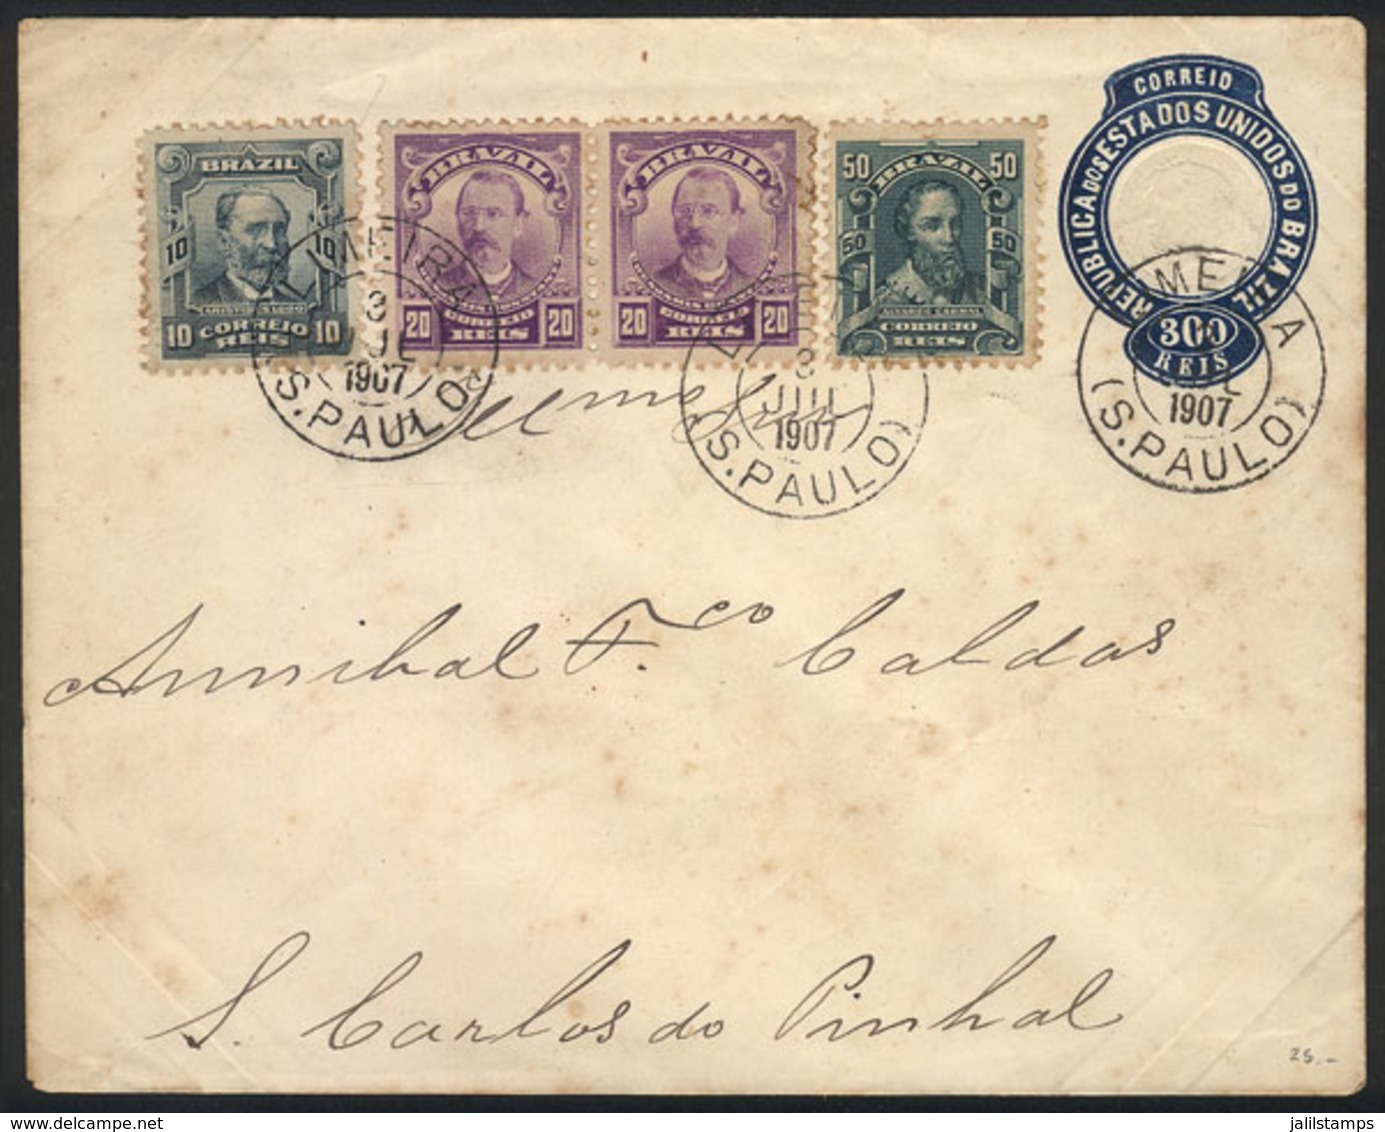 BRAZIL: 300Rs. Stationery Envelope + 100Rs. Sent To S.Carlos Do Pinhal On 3/JUL/1907, Cancelled In LIMEIRA (S.Paulo), VF - Prefilatelia